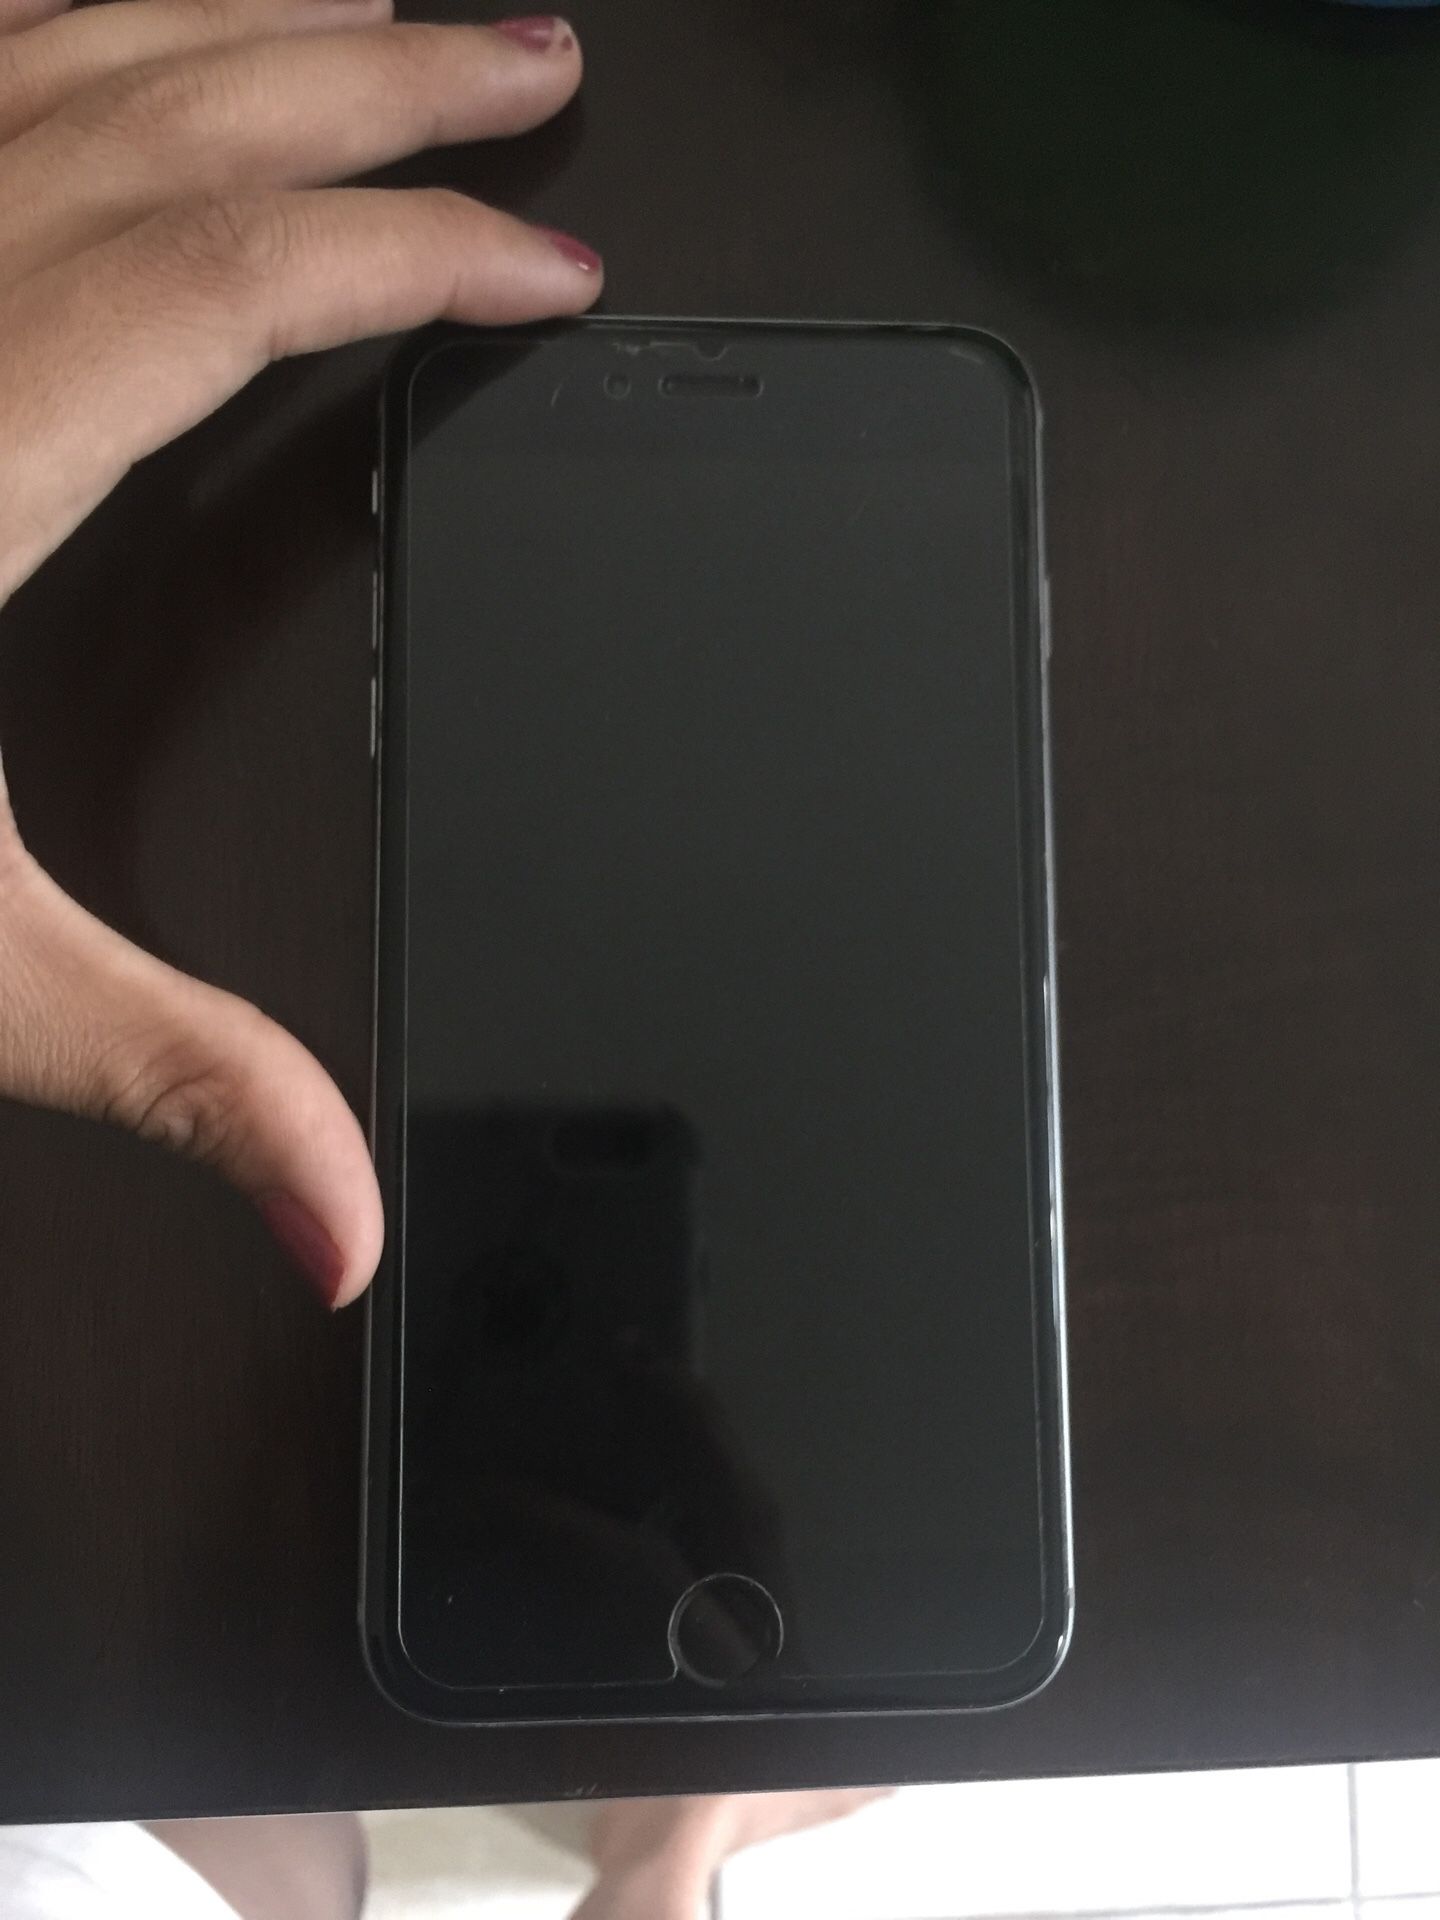 iPhone 6 Plus! 16 Gb really good condition!